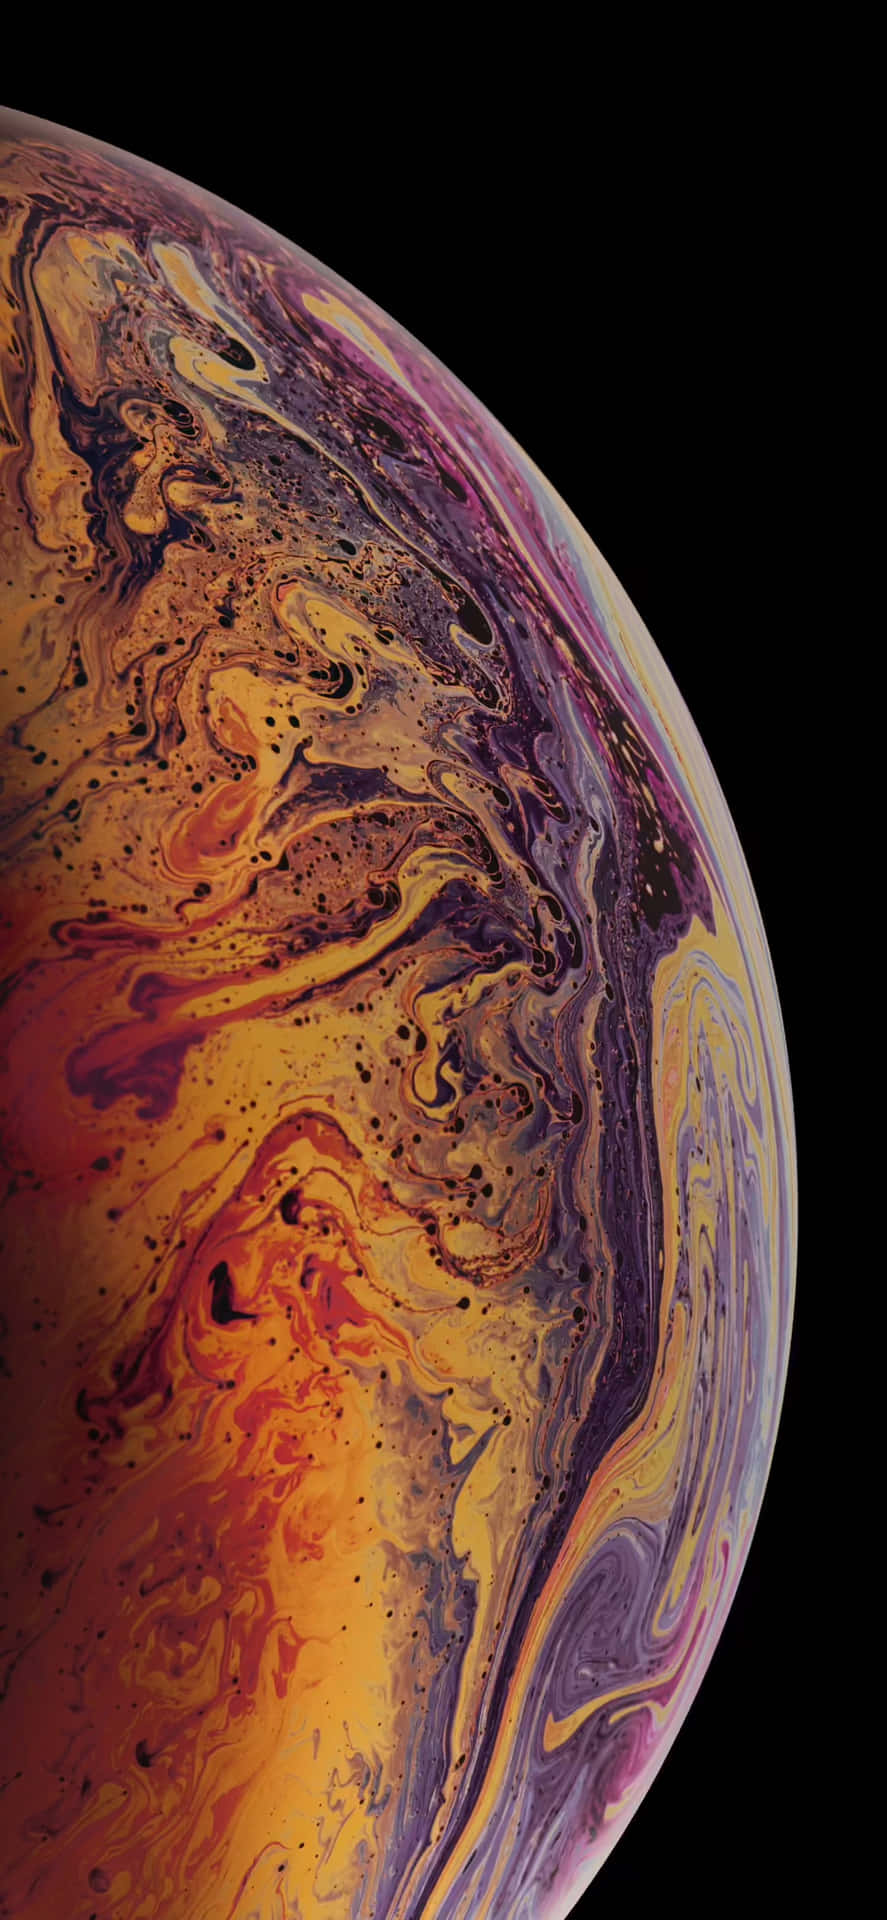 An Image Of An Apple Iphone Xs With A Colorful Swirl